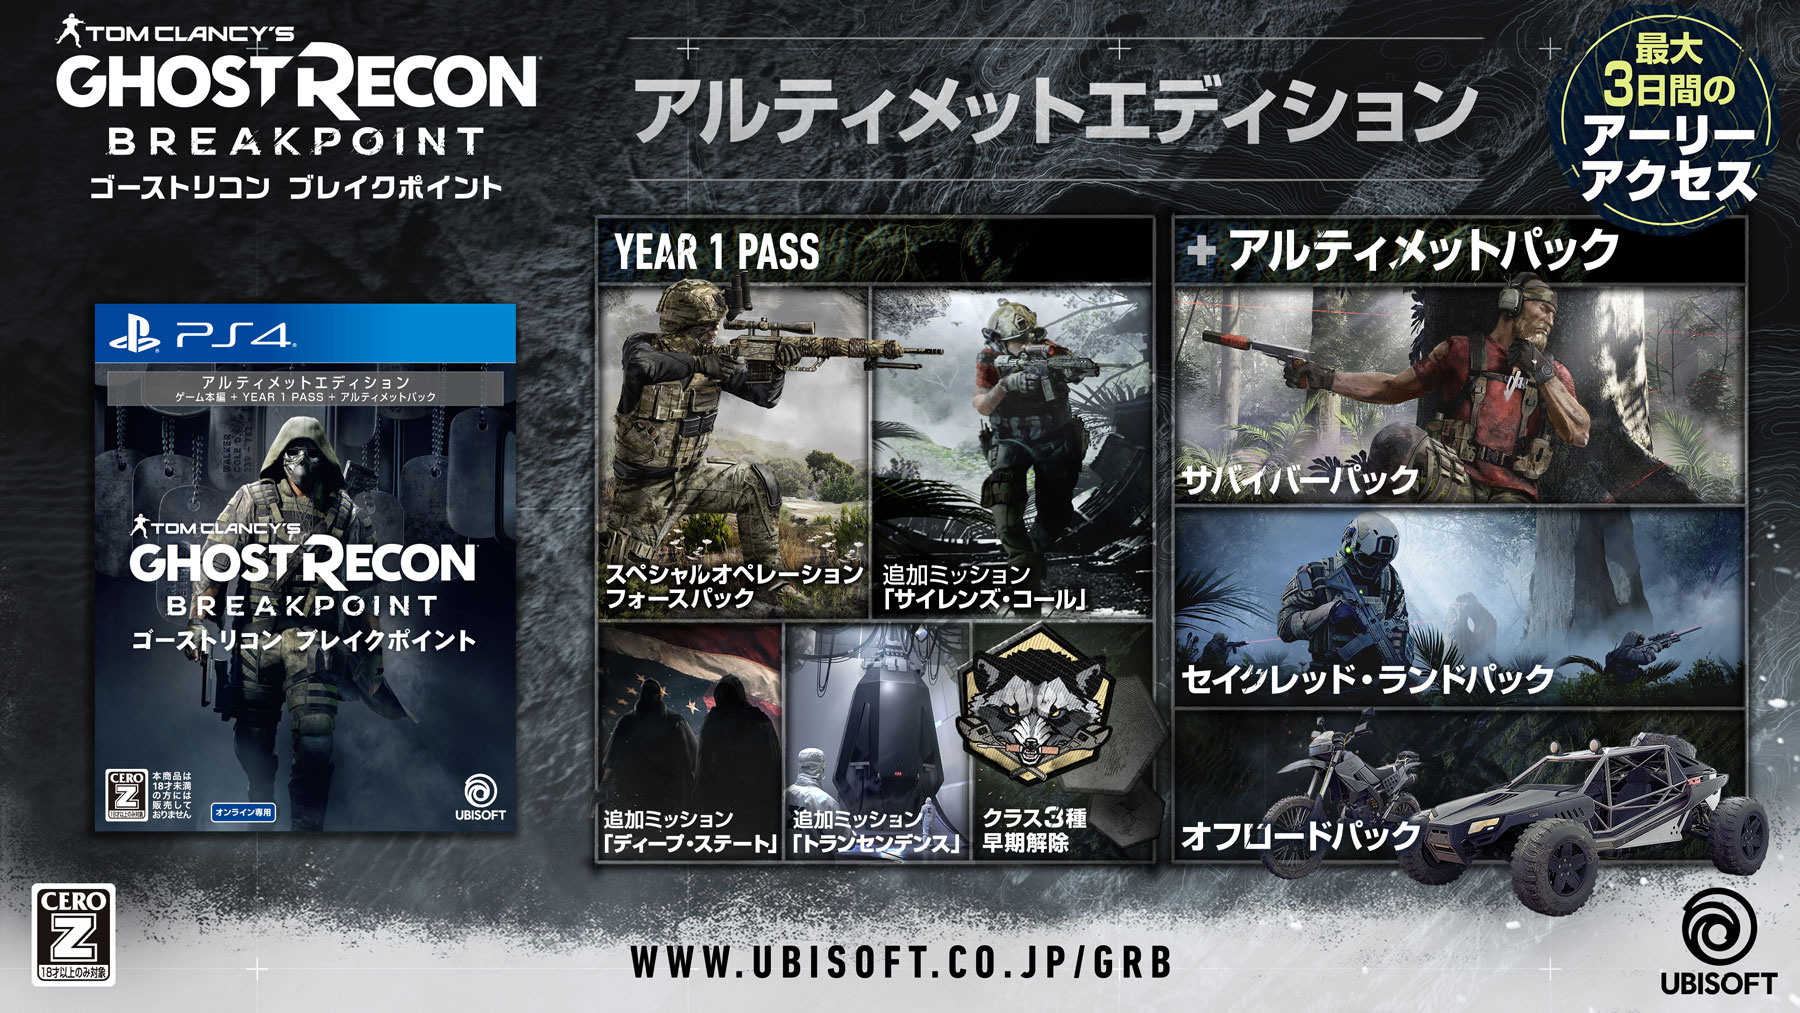 Tom clancy s ultimate edition. Tom Clancy's Ghost Recon breakpoint ps4 диск. Ghost Recon миномет. Диск на плейстейшен 4 Ghost Recon Break point. ГОСТ Рекон брейкпоинт ультимейт эдишн ps4.